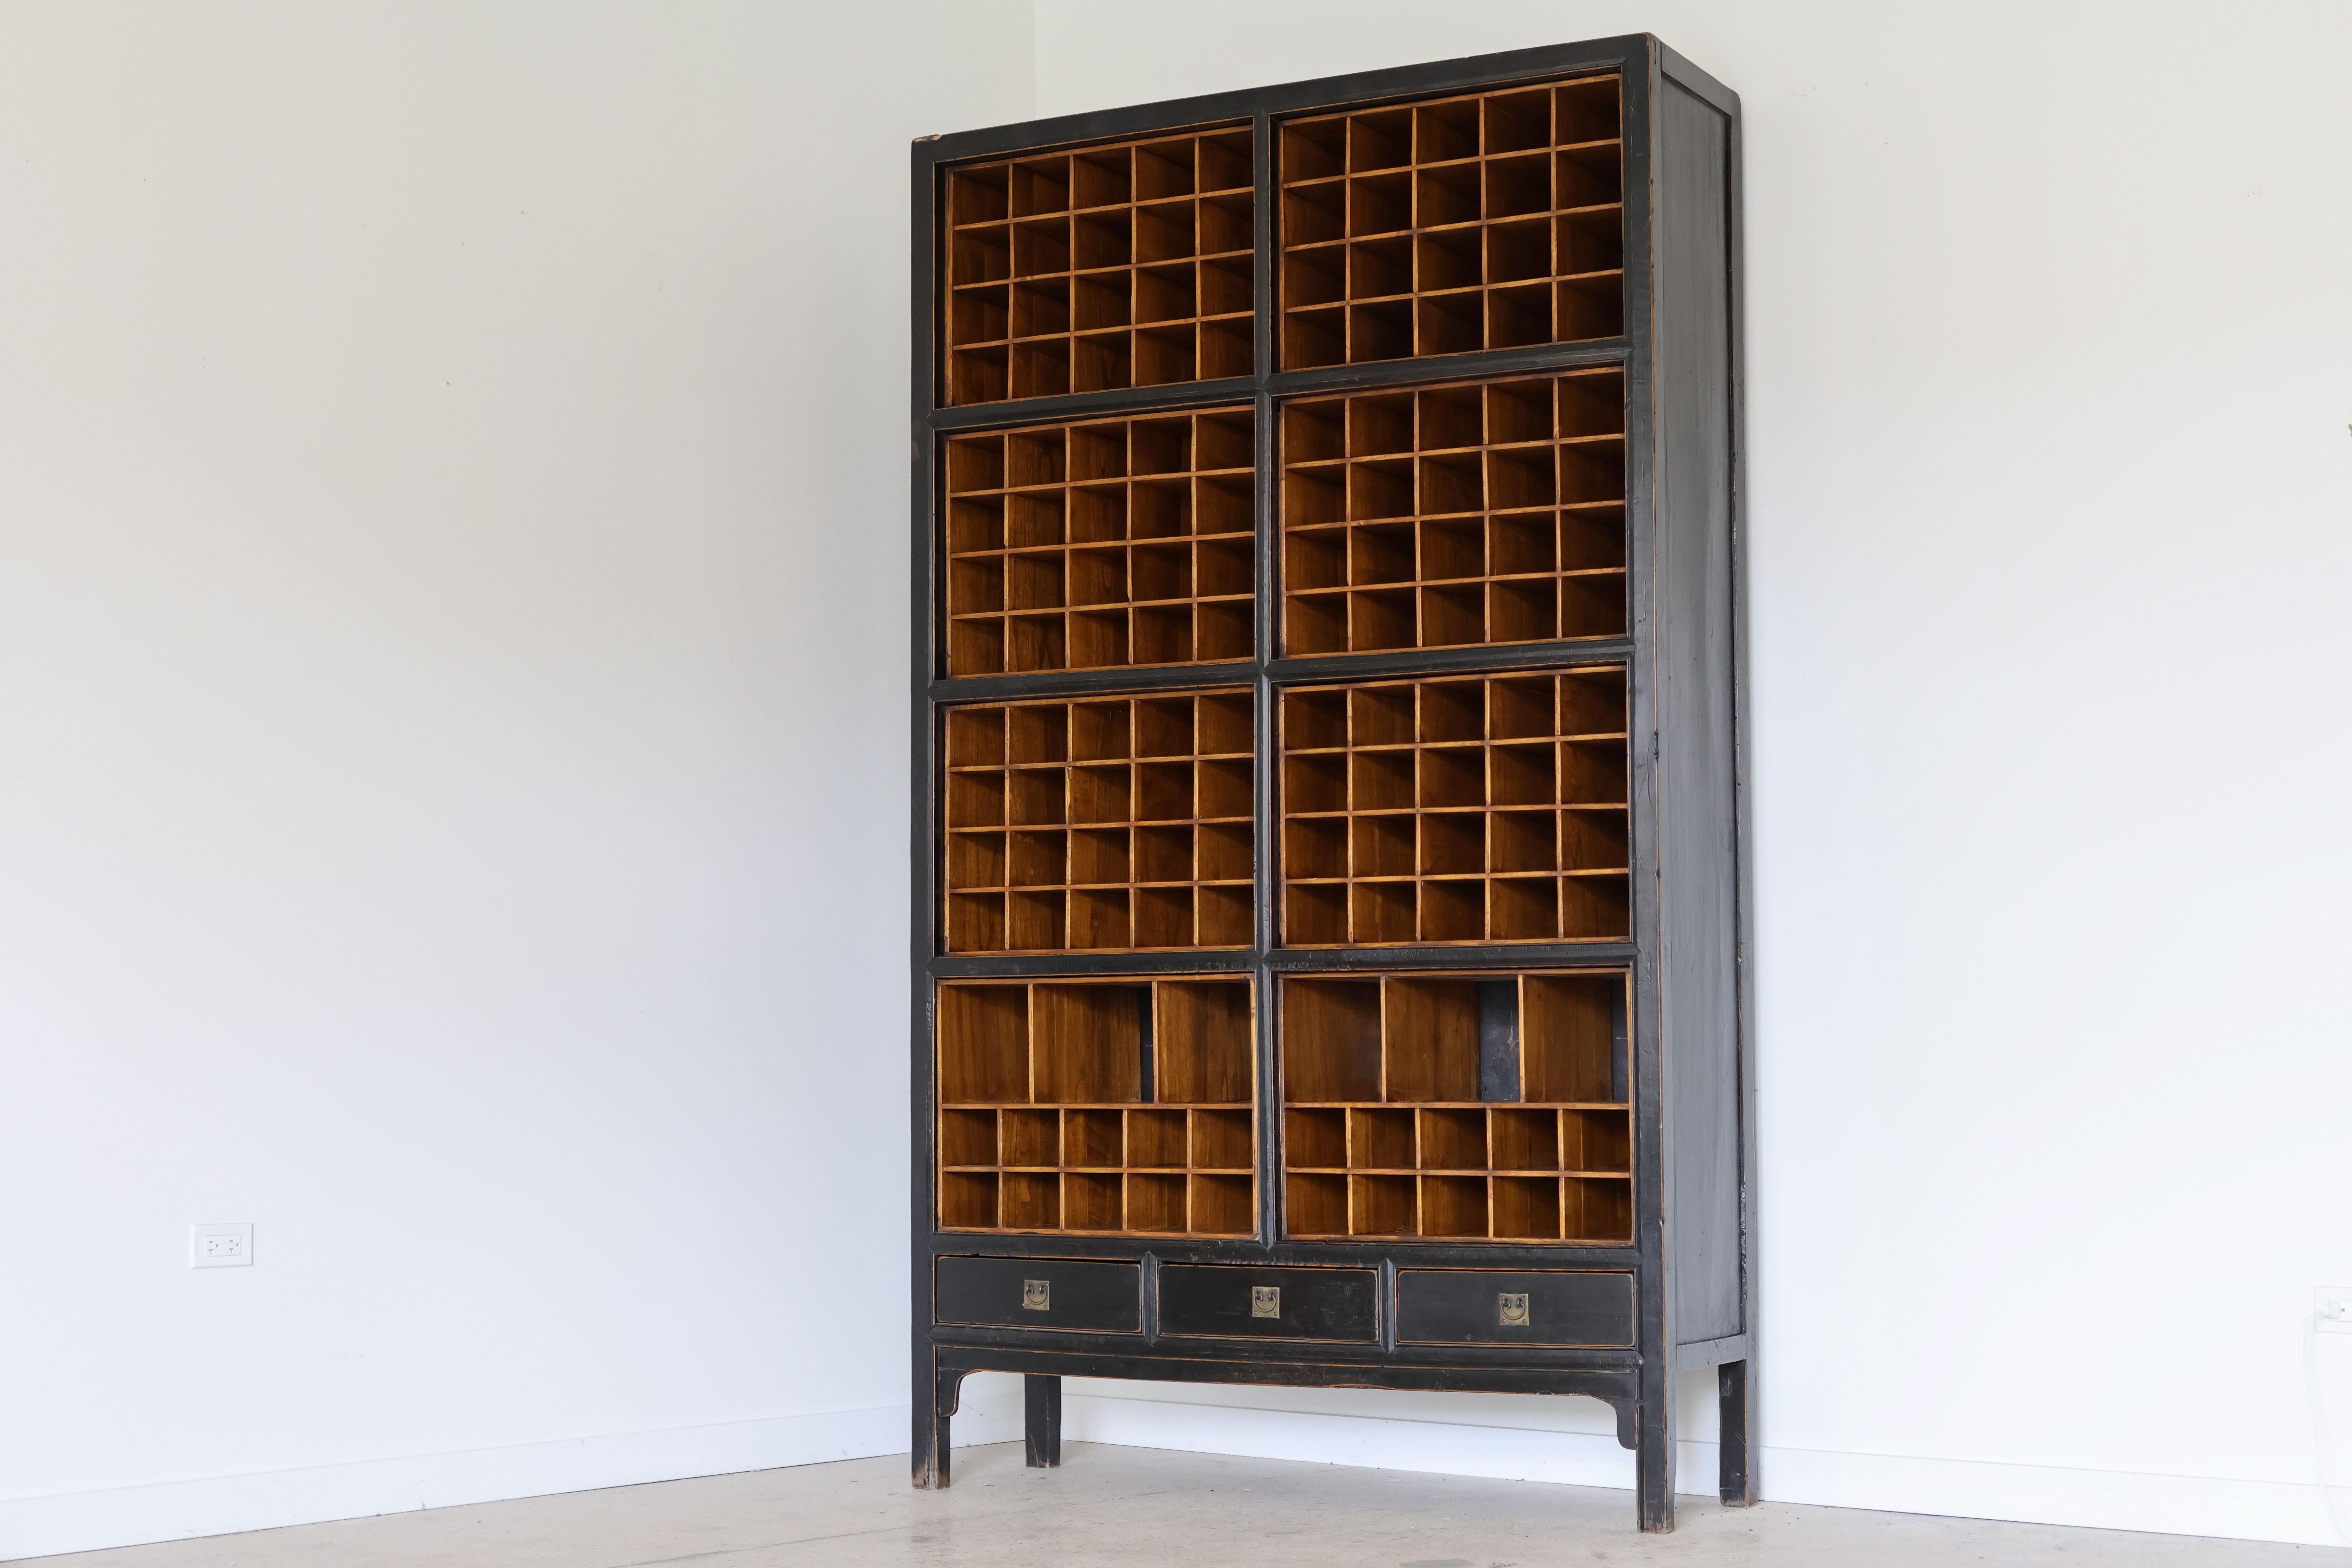 Extra tall vintage black lacquered organizer salvaged from a Chicago downtown architects office.
Likely used as a mail sorter, this mammoth piece fits wine bottles!
Lowest two cubby frames have the option to slide out completely.
Three drawers along